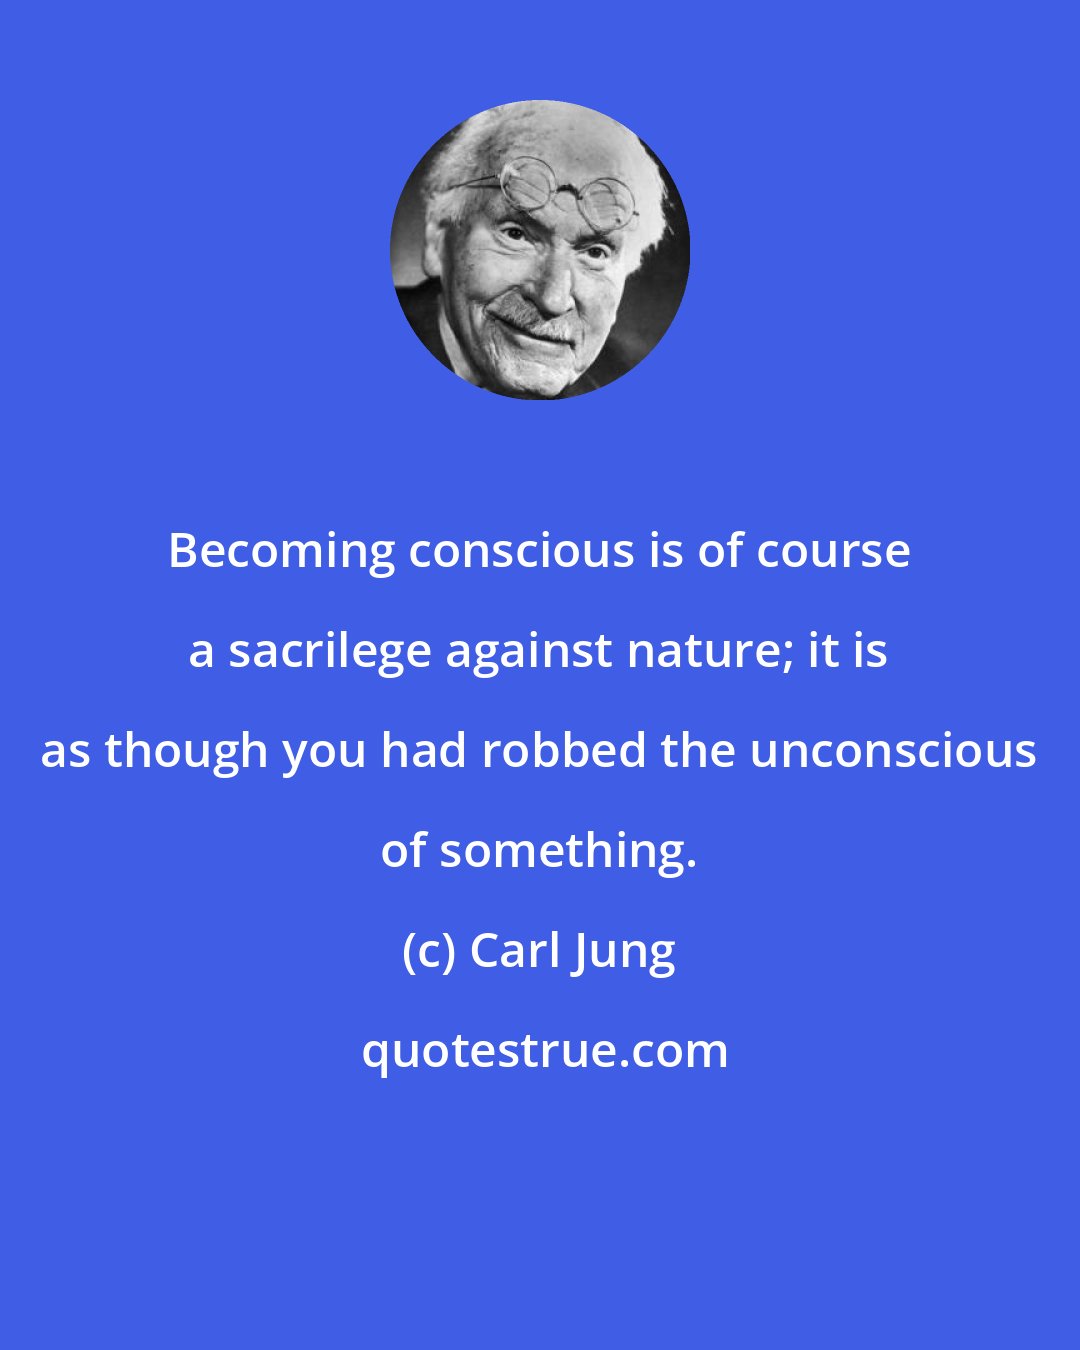 Carl Jung: Becoming conscious is of course a sacrilege against nature; it is as though you had robbed the unconscious of something.